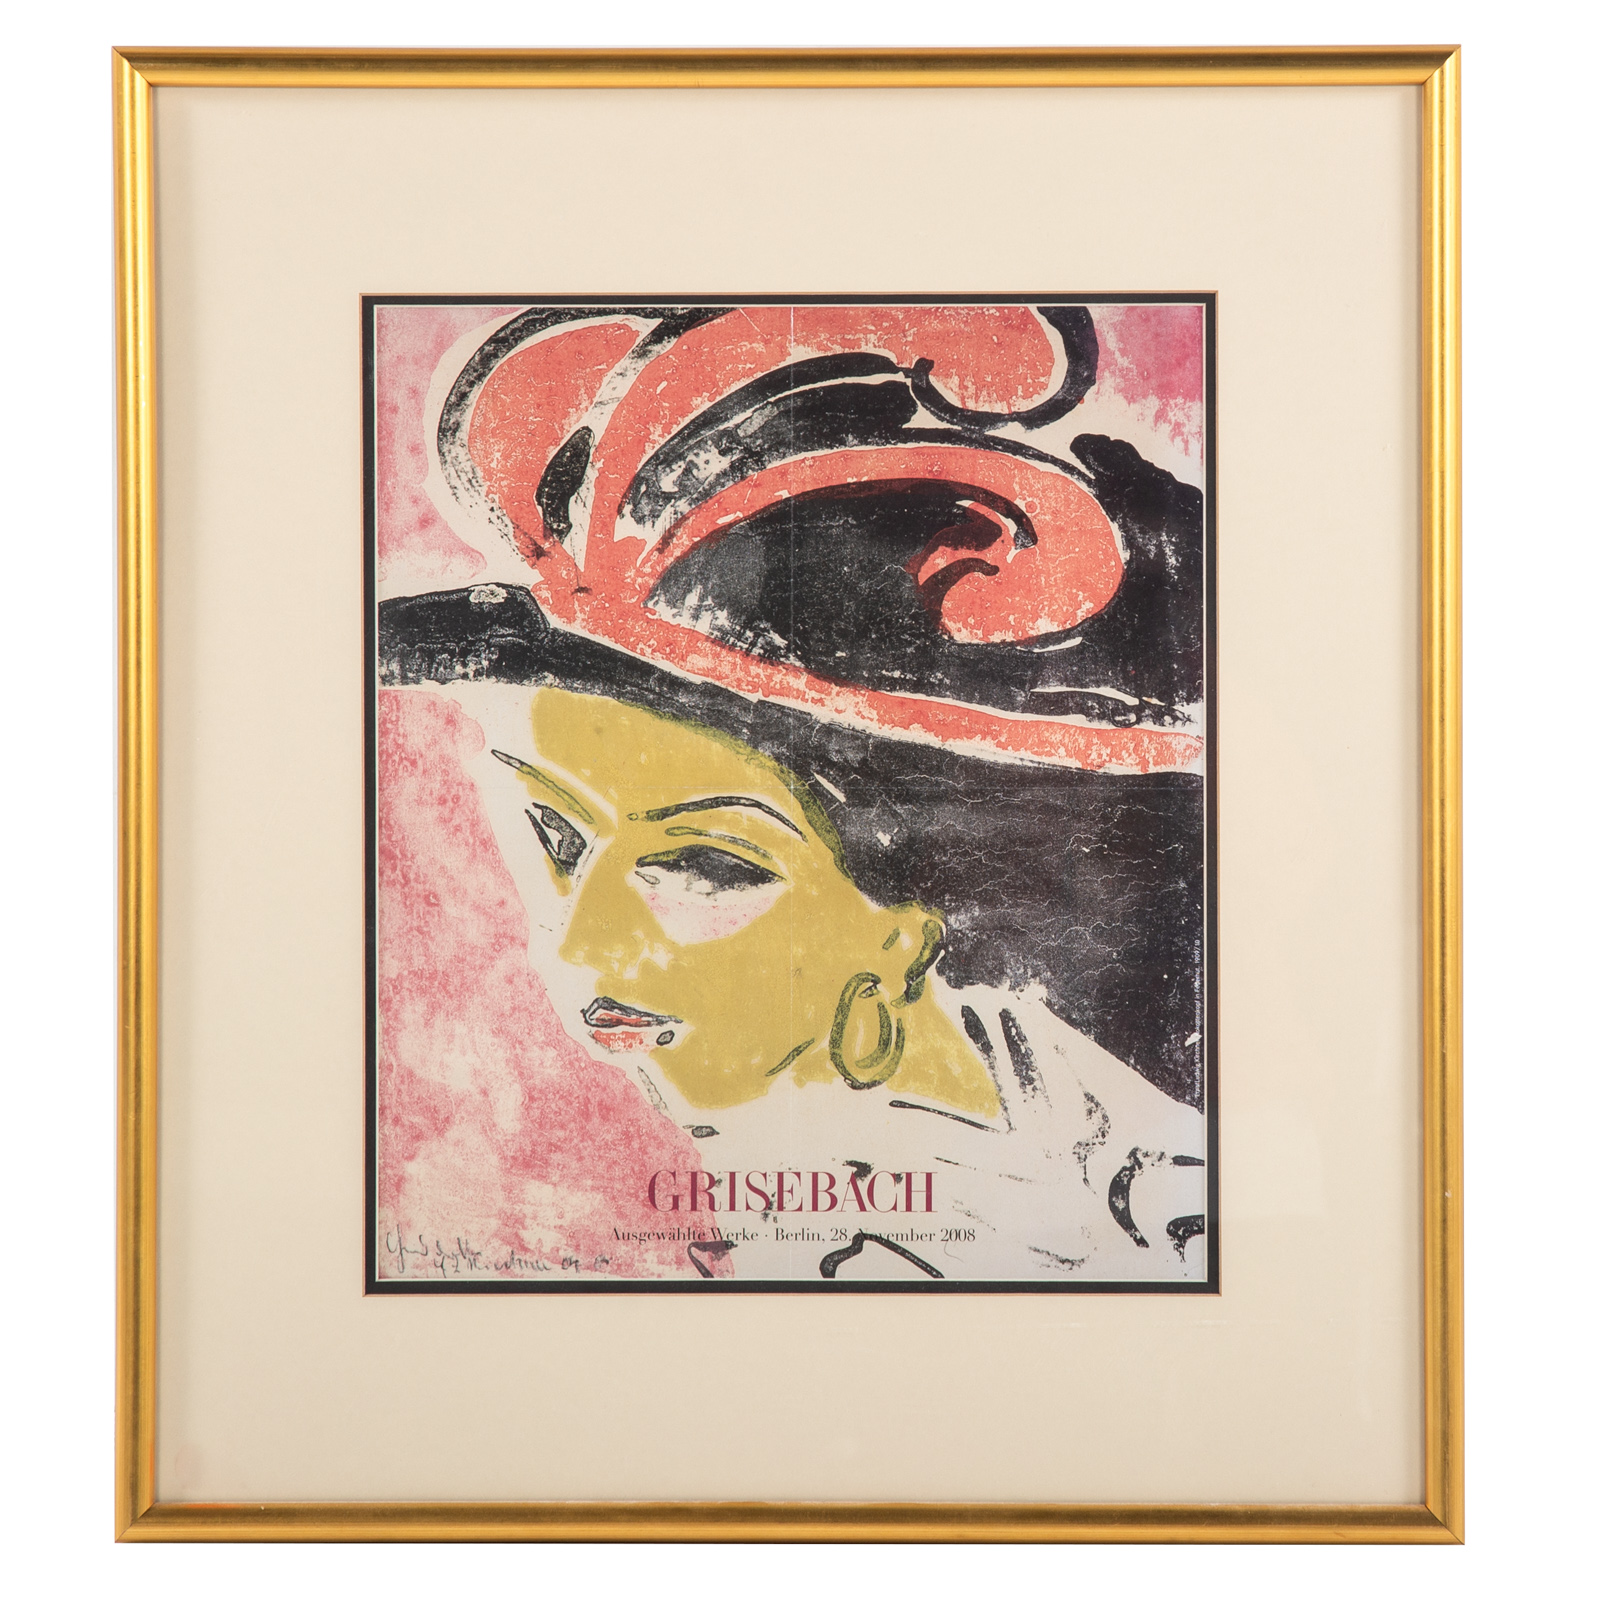 ERNST LUDWIG KIRCHNER. GRIESBACH AUCTION,